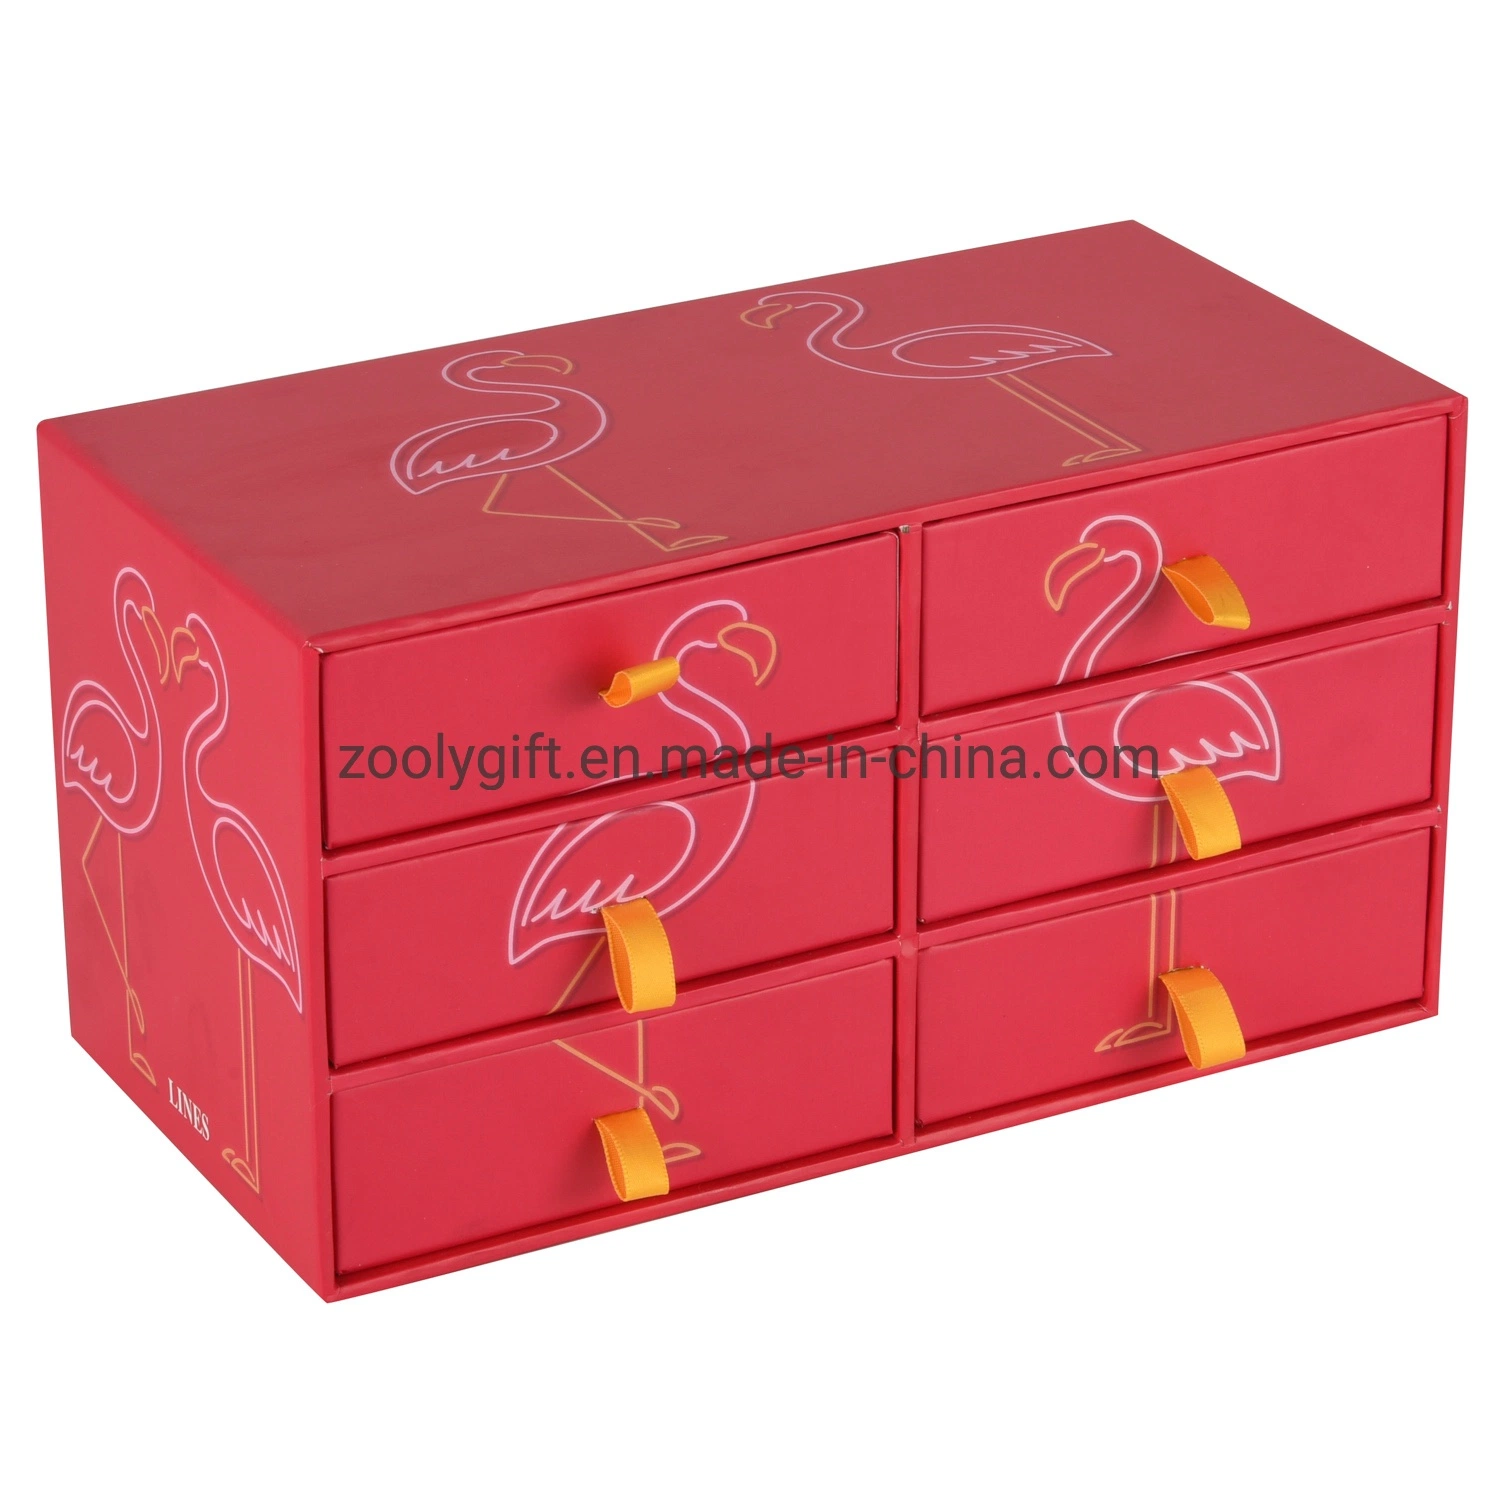 Customized Cosmetic Box with 6 Drawers Rigid Paper Drawer Box with Ribbon Makeup Organizer Storage Box Promotional Paper Gift Boxes Jewelry Drawer Box